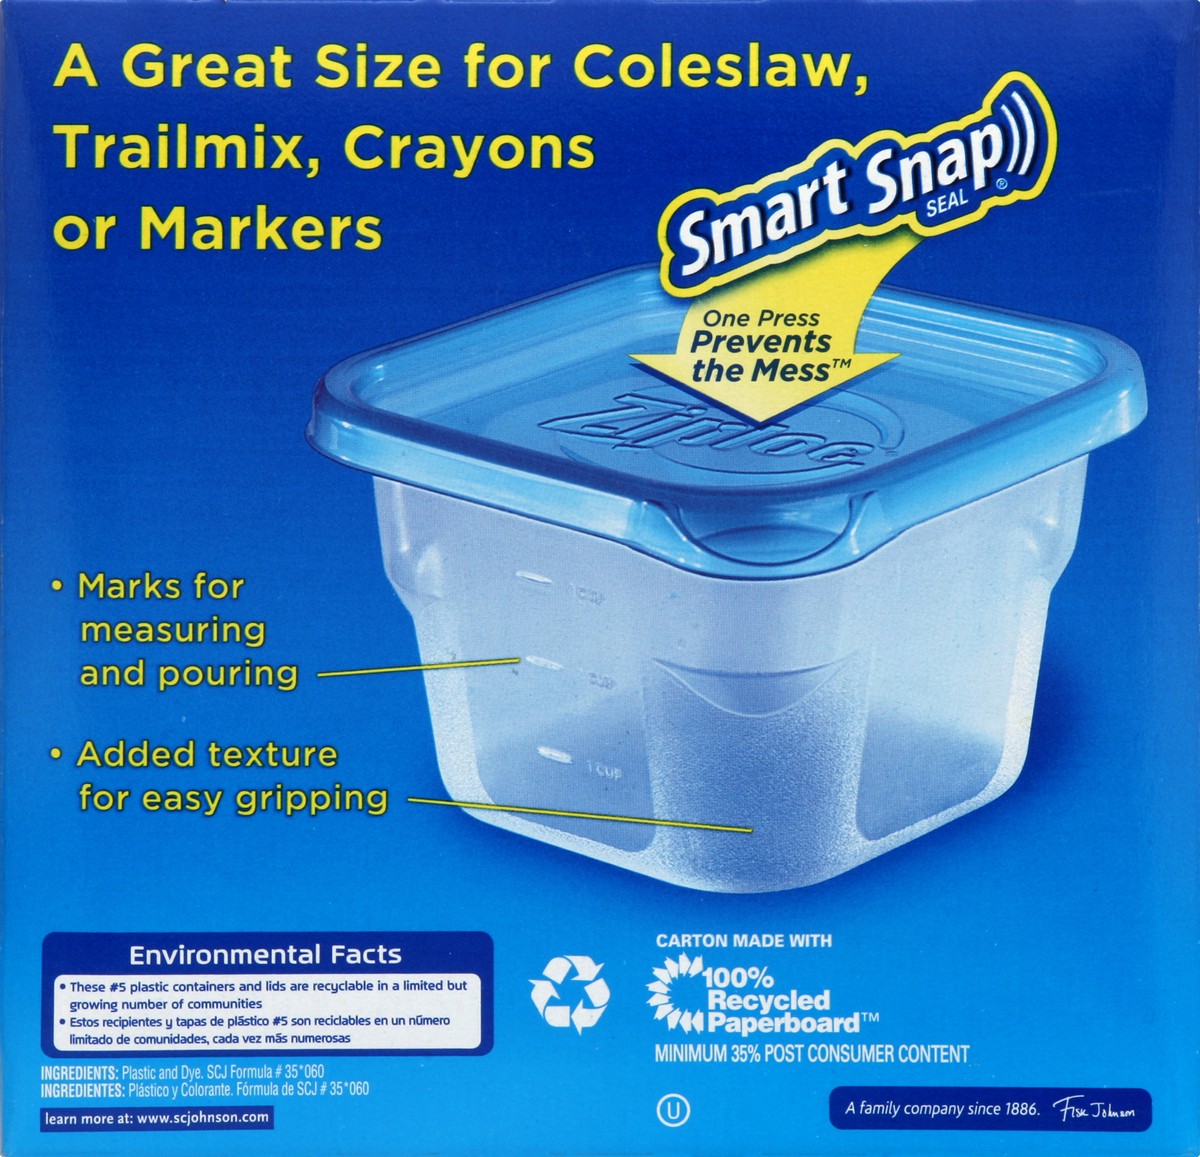 Total Home Medium Square Food Storage Containers, 32 oz, 4 ct